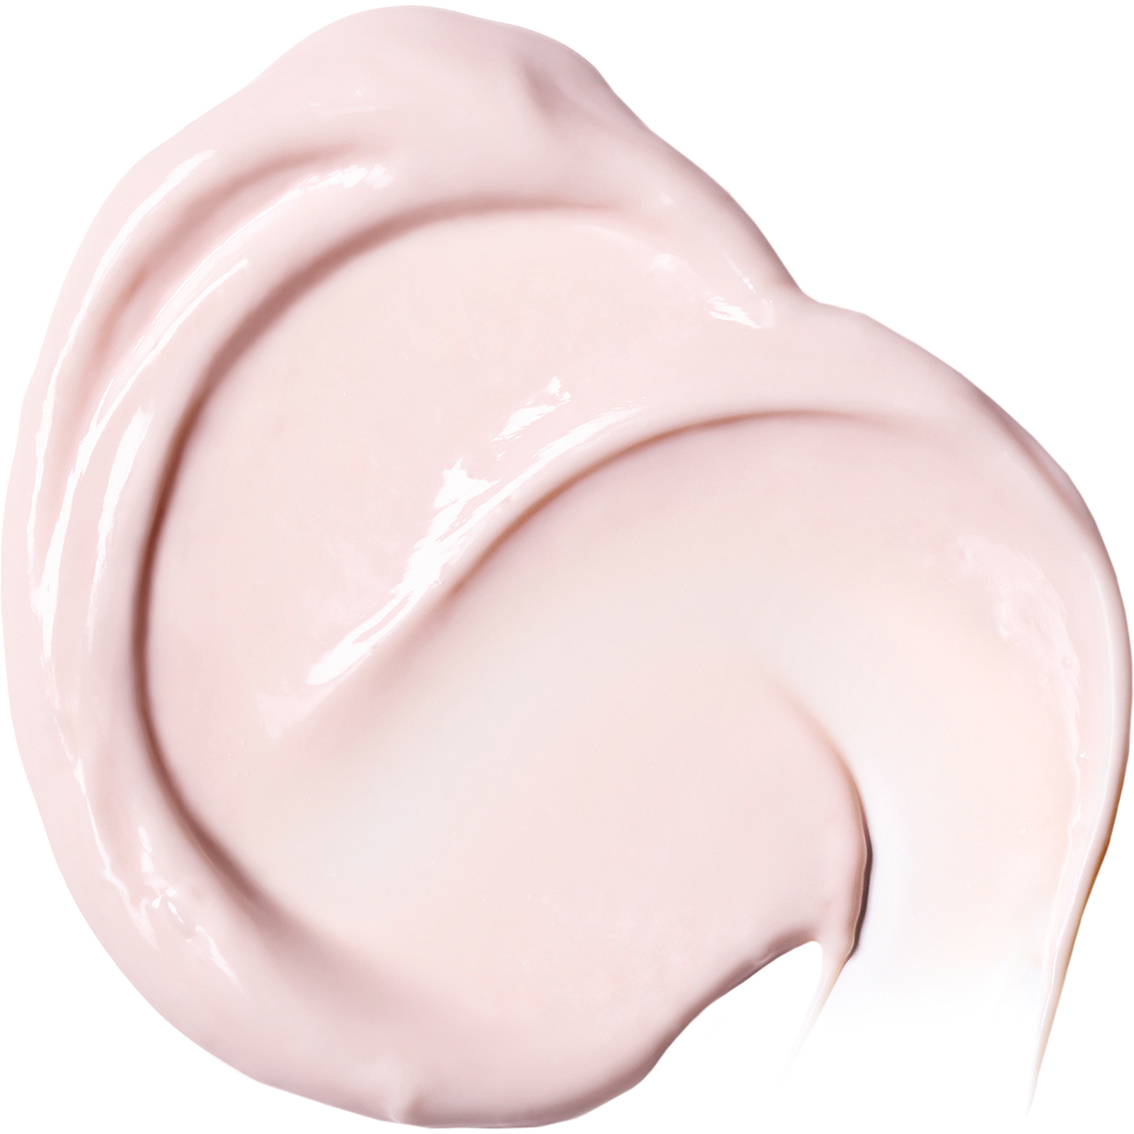 Shiseido Vital Perfection Uplifting and Firming Day Cream Broad Spectrum SPF30 - Image 3 of 3